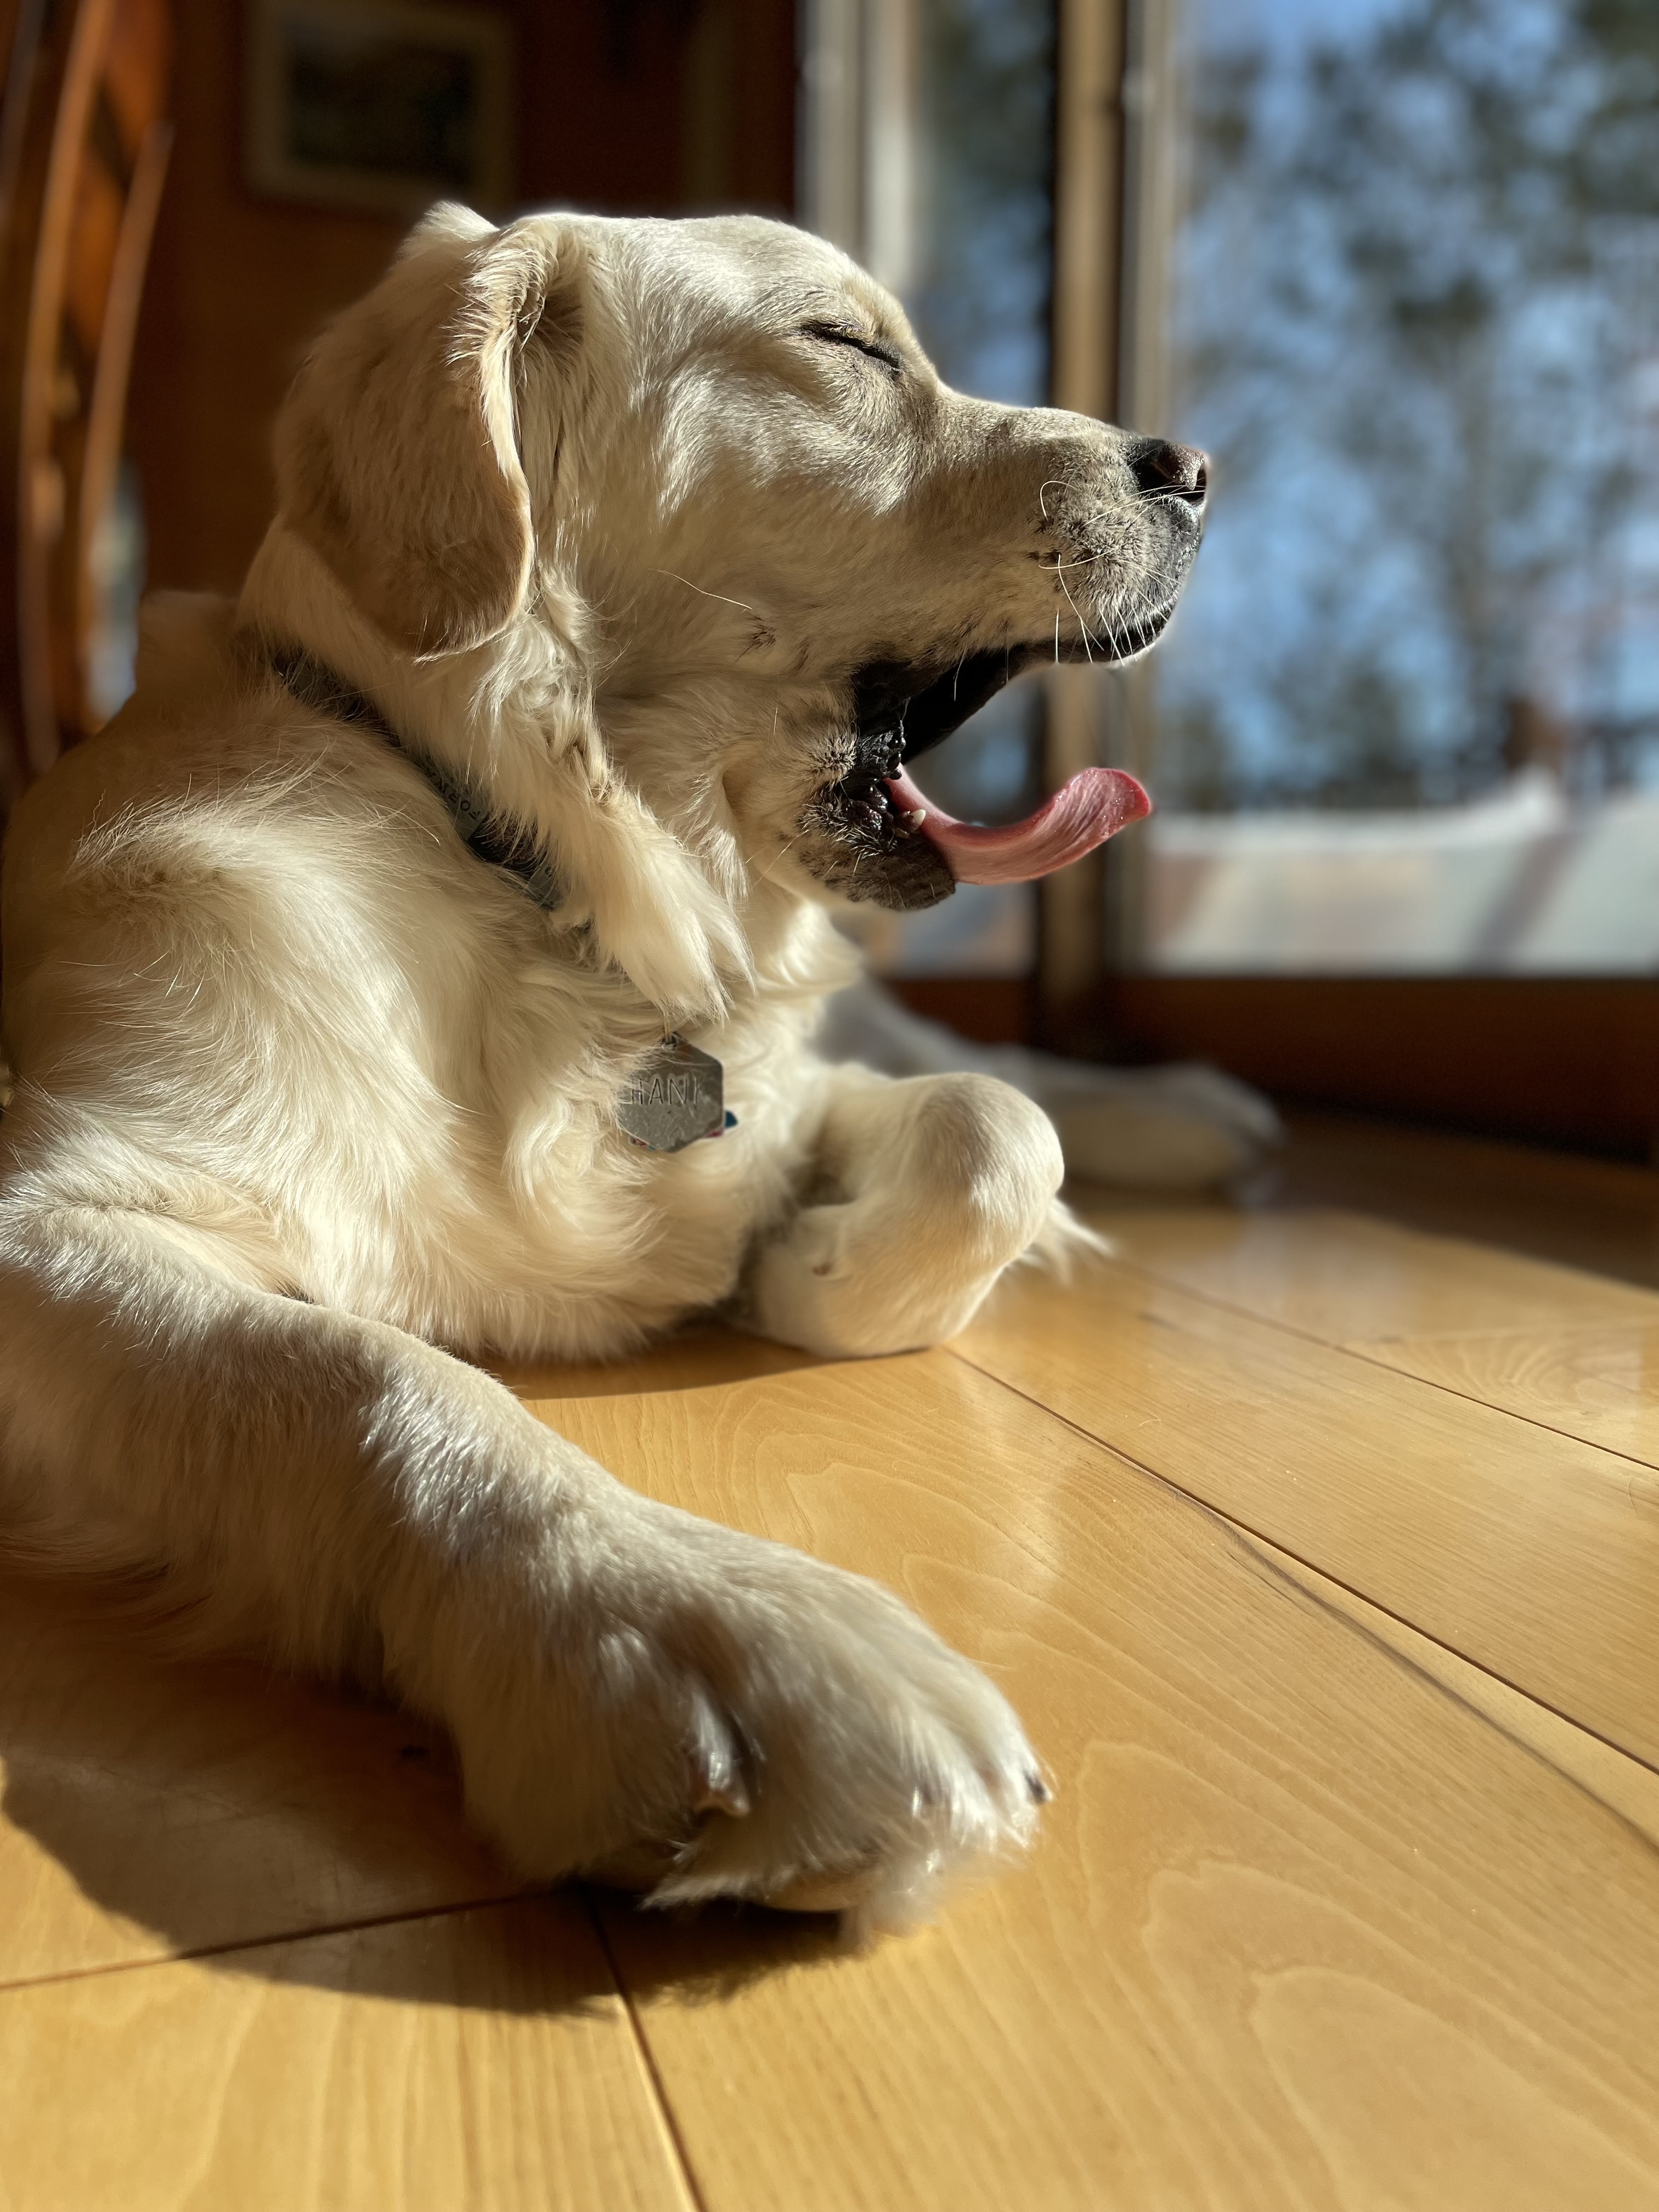 color photo of yellow dog yawning with eyes closed laying on belly on wood floor with blurred background of window and trees